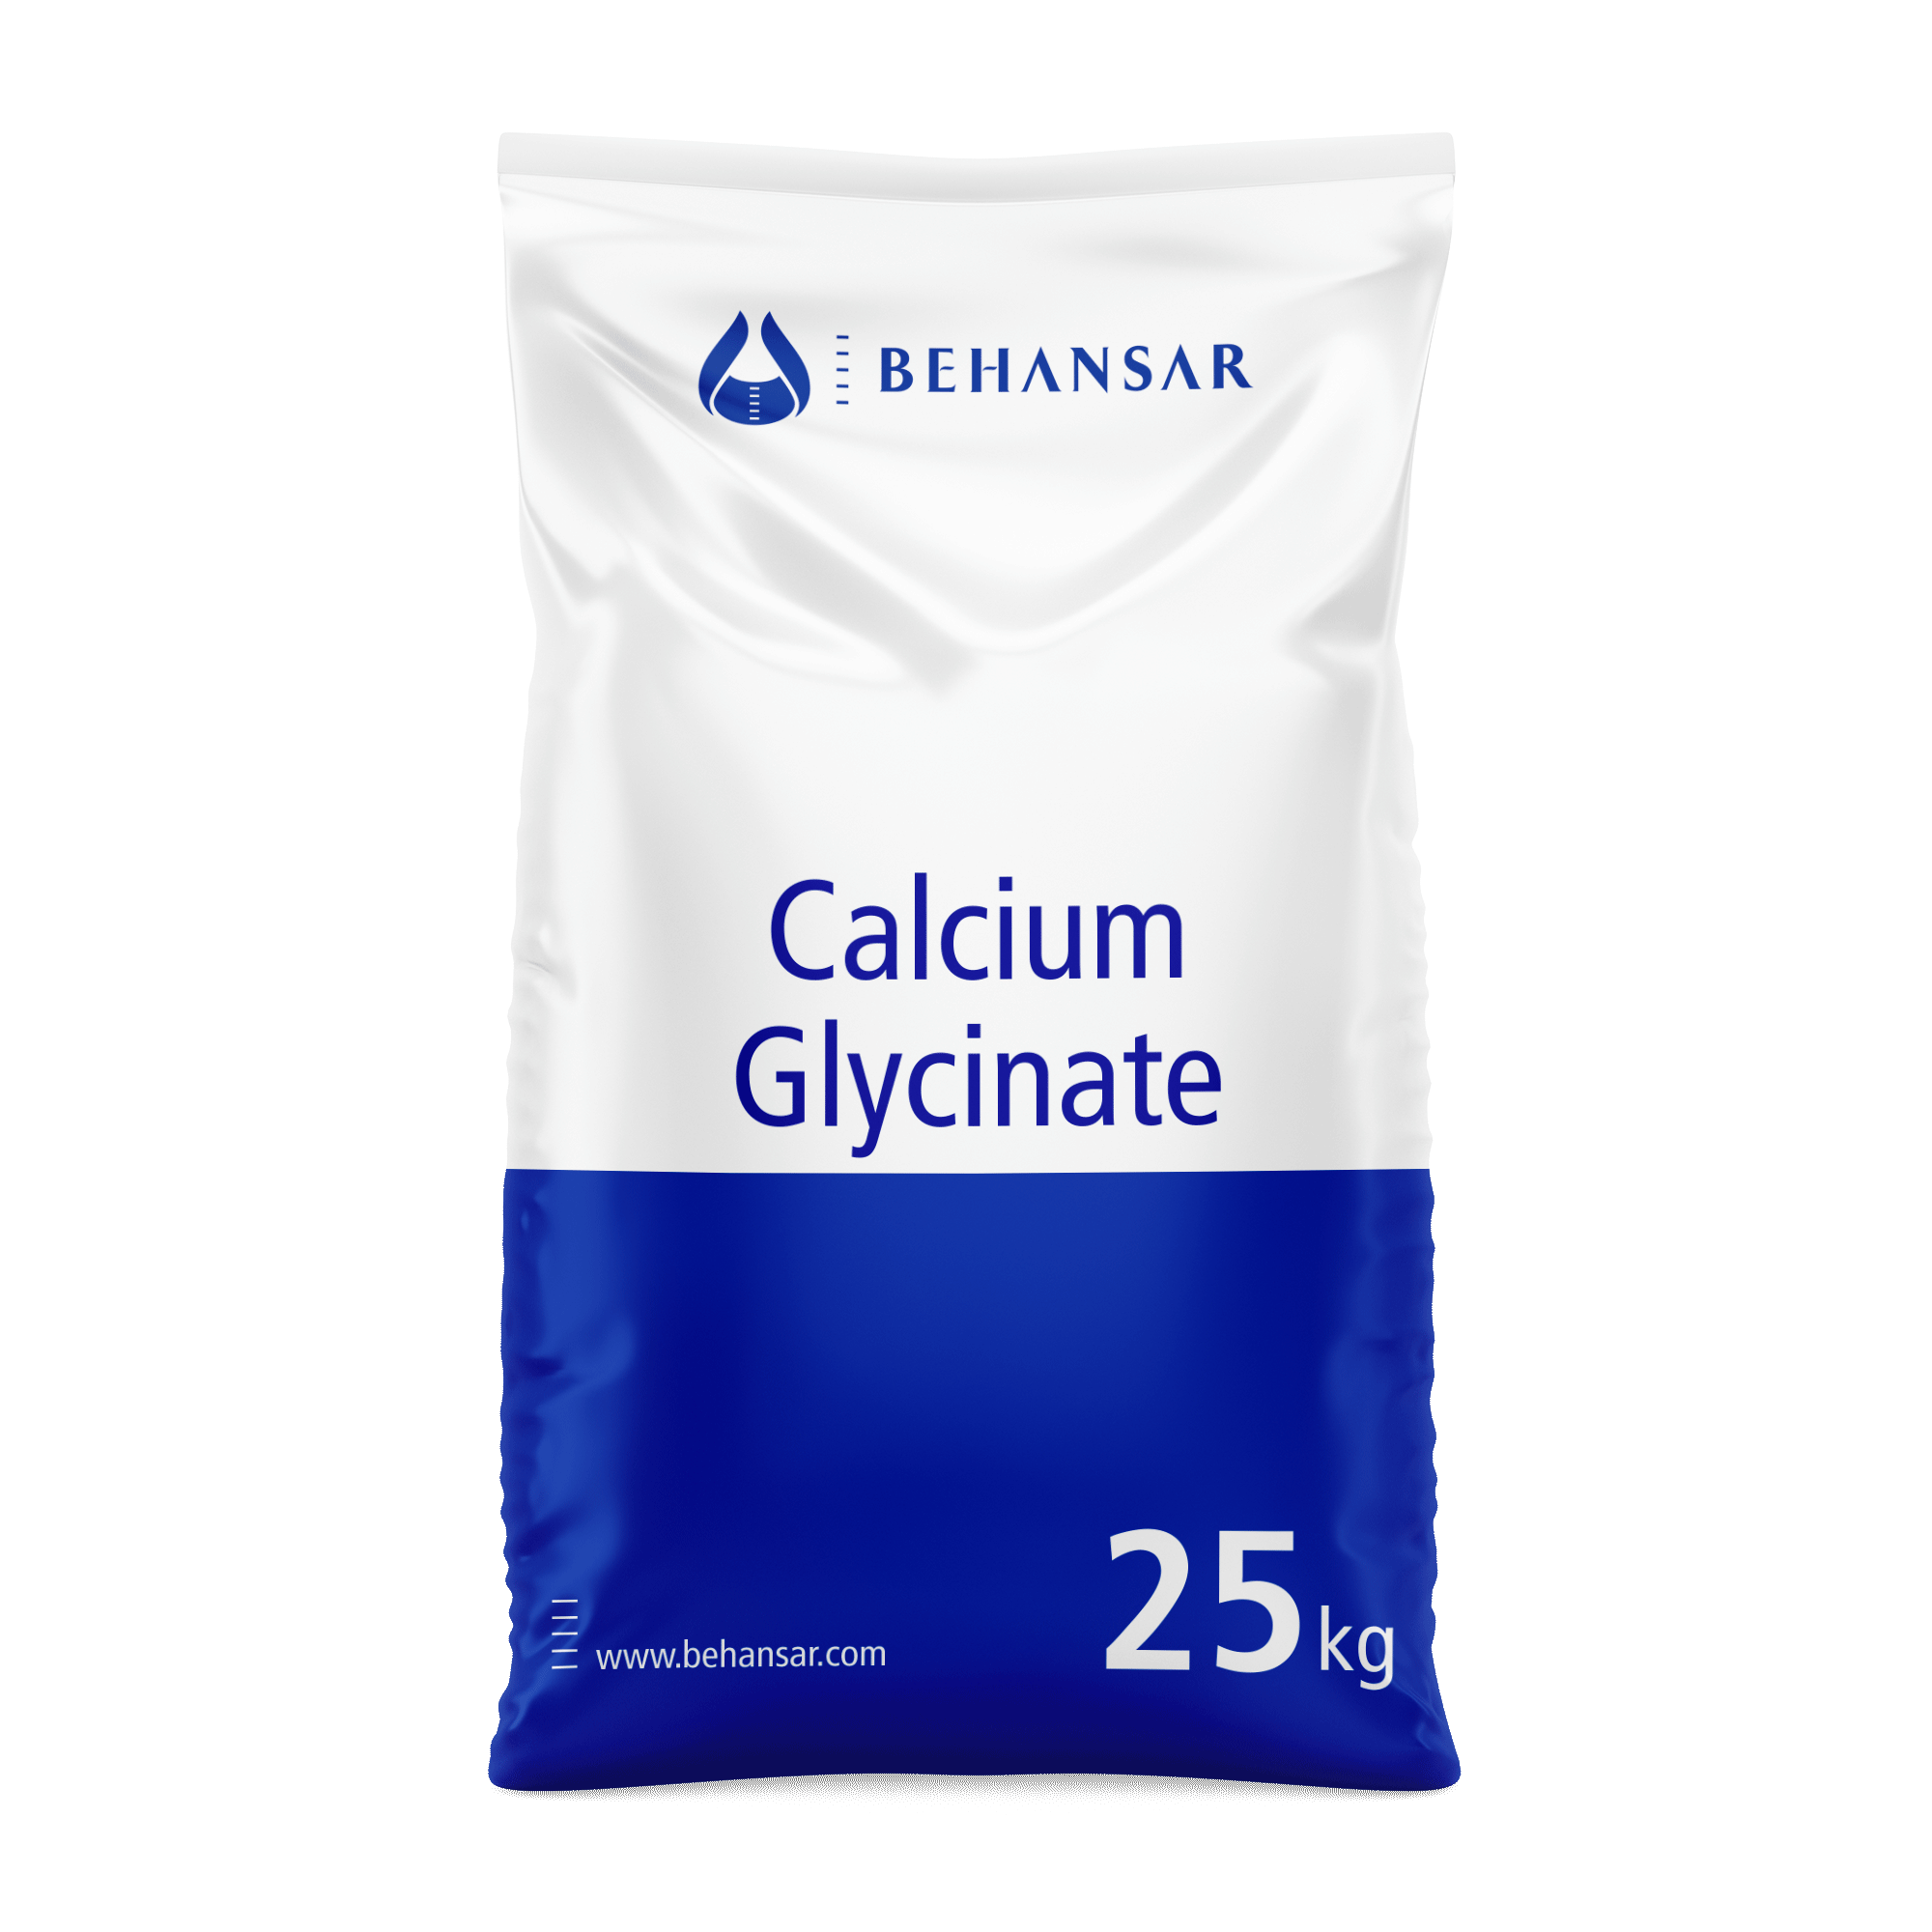 Calcium Glycinate is one of the products of Behansar Co